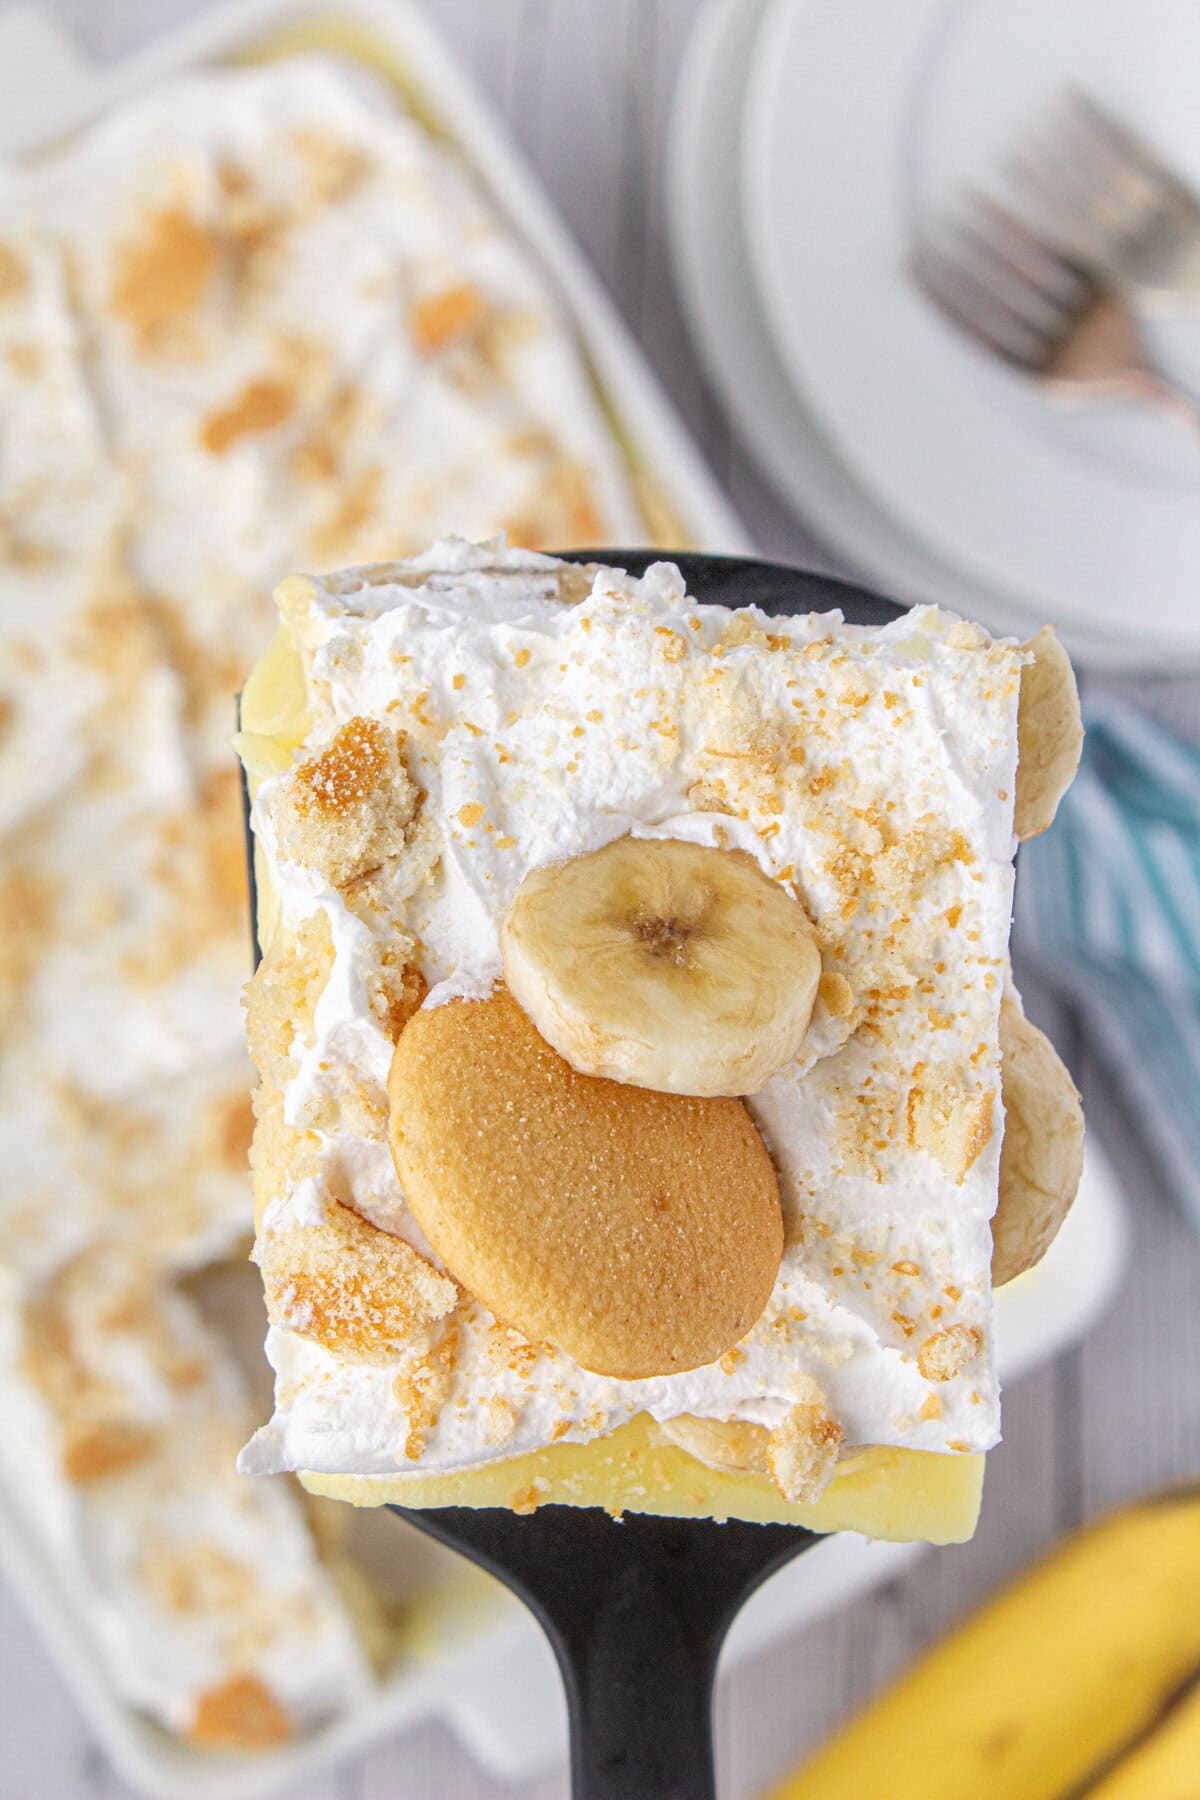 An overhead view of a slice of banana poke cake with whipped cream and sliced bananas.